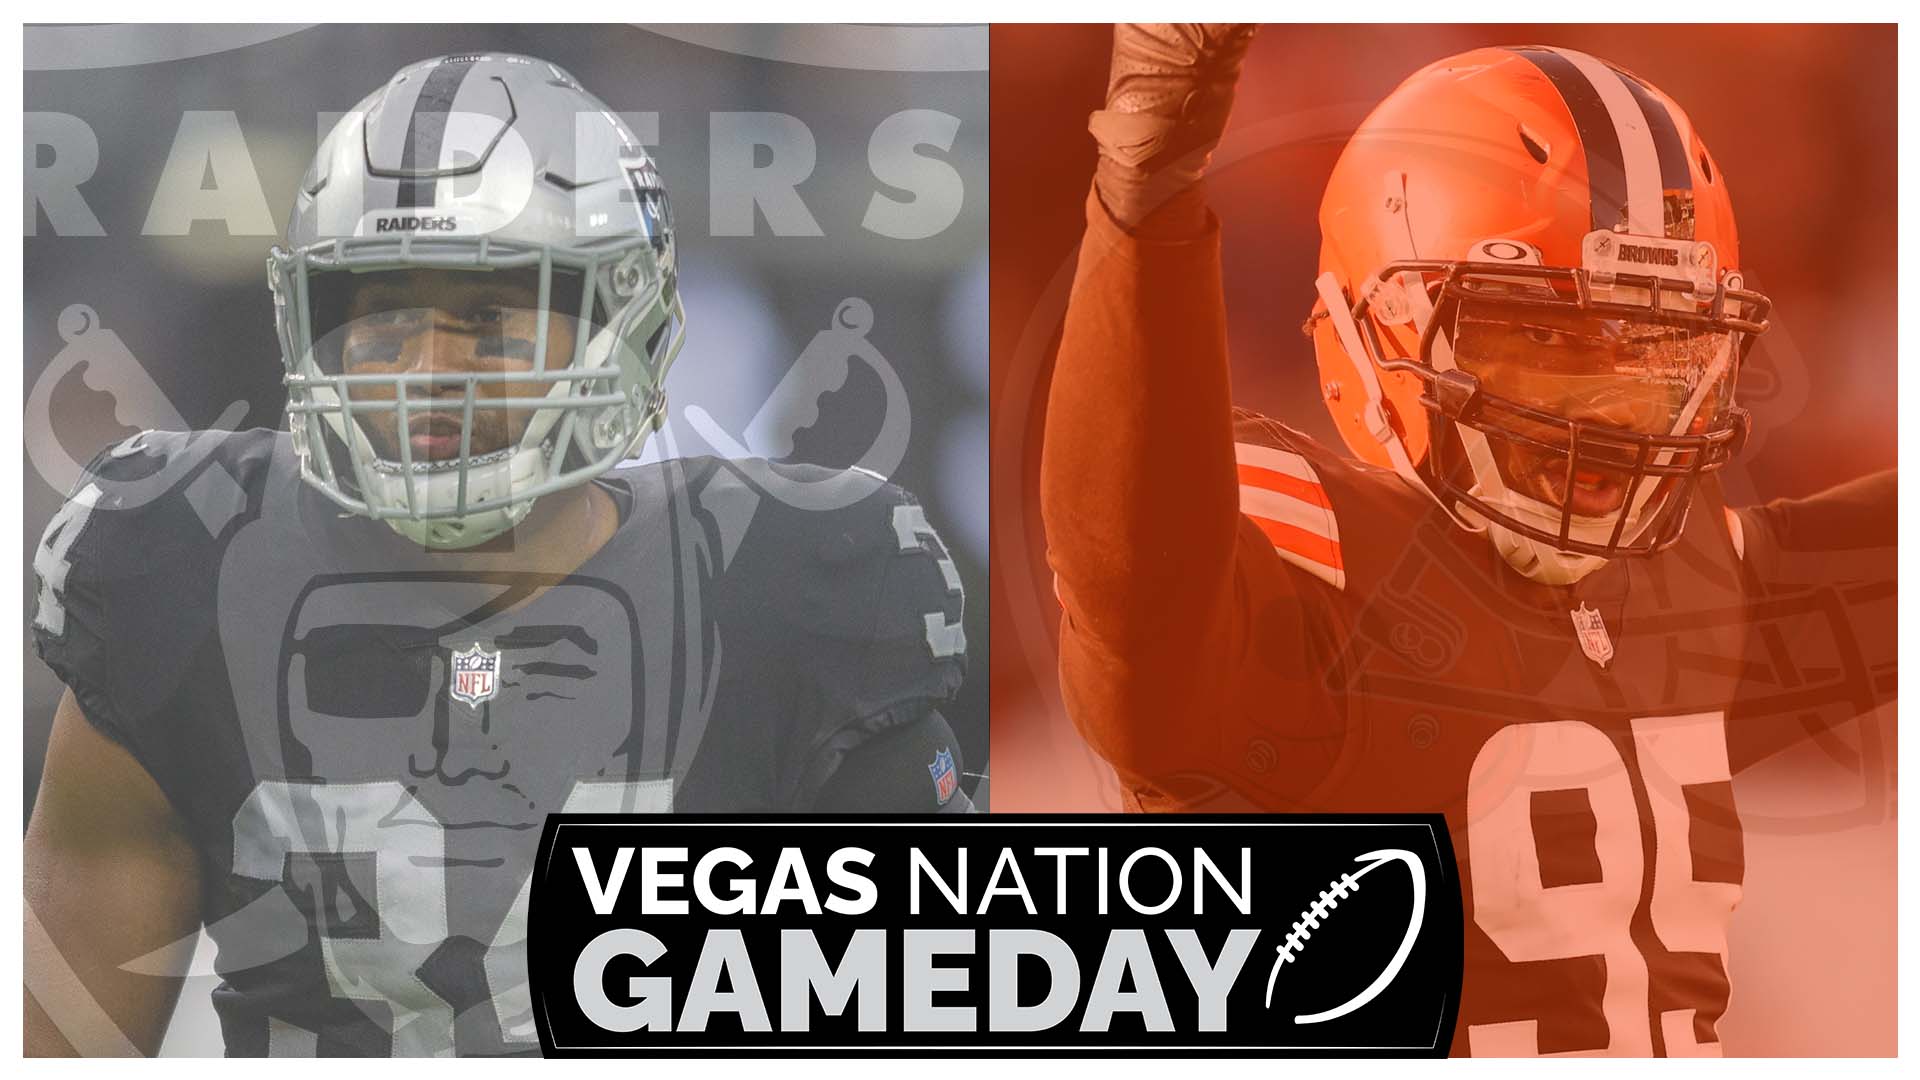 Raiders-Browns Game Rescheduled Due to COVID | Vegas Nation Gameday